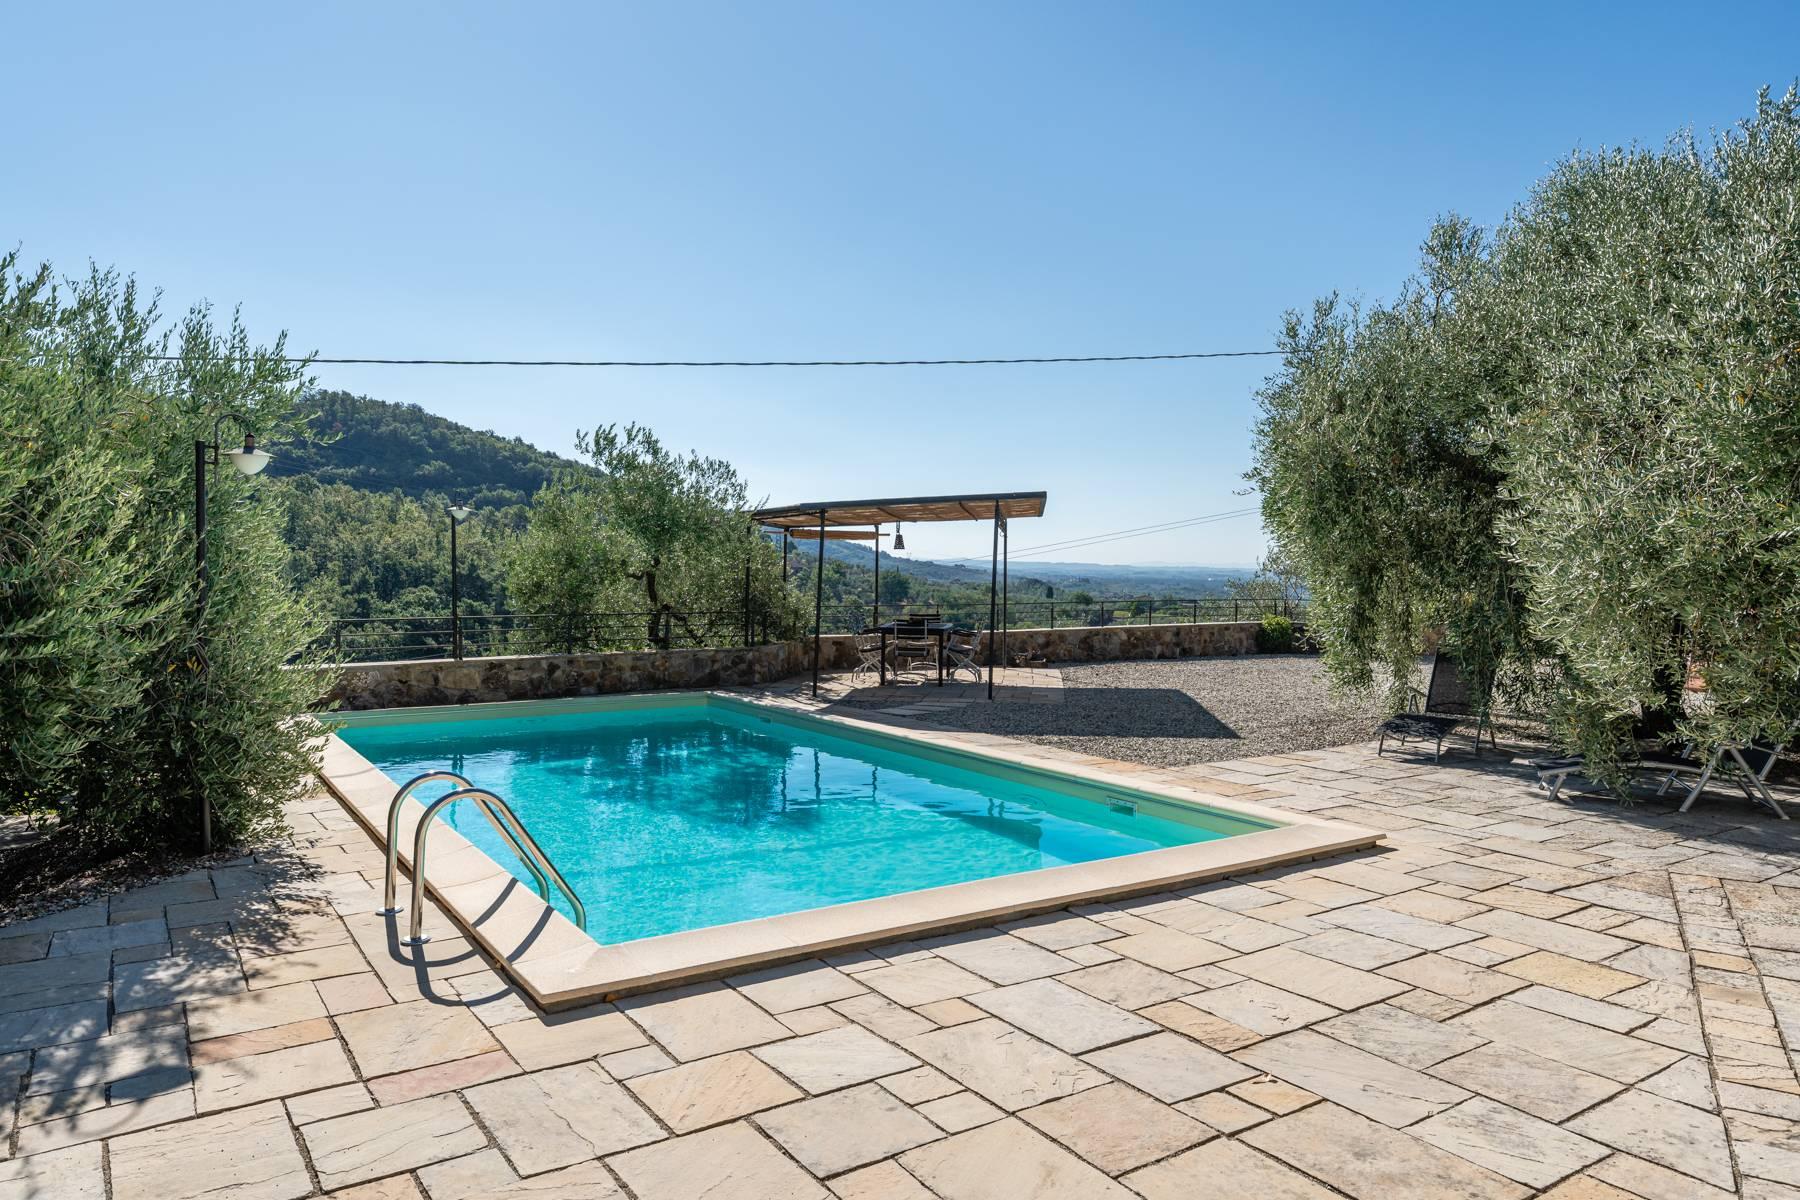 One-of-a-kind Tuscan cottage on the hills between Lucca and Montecatini Terme - 1